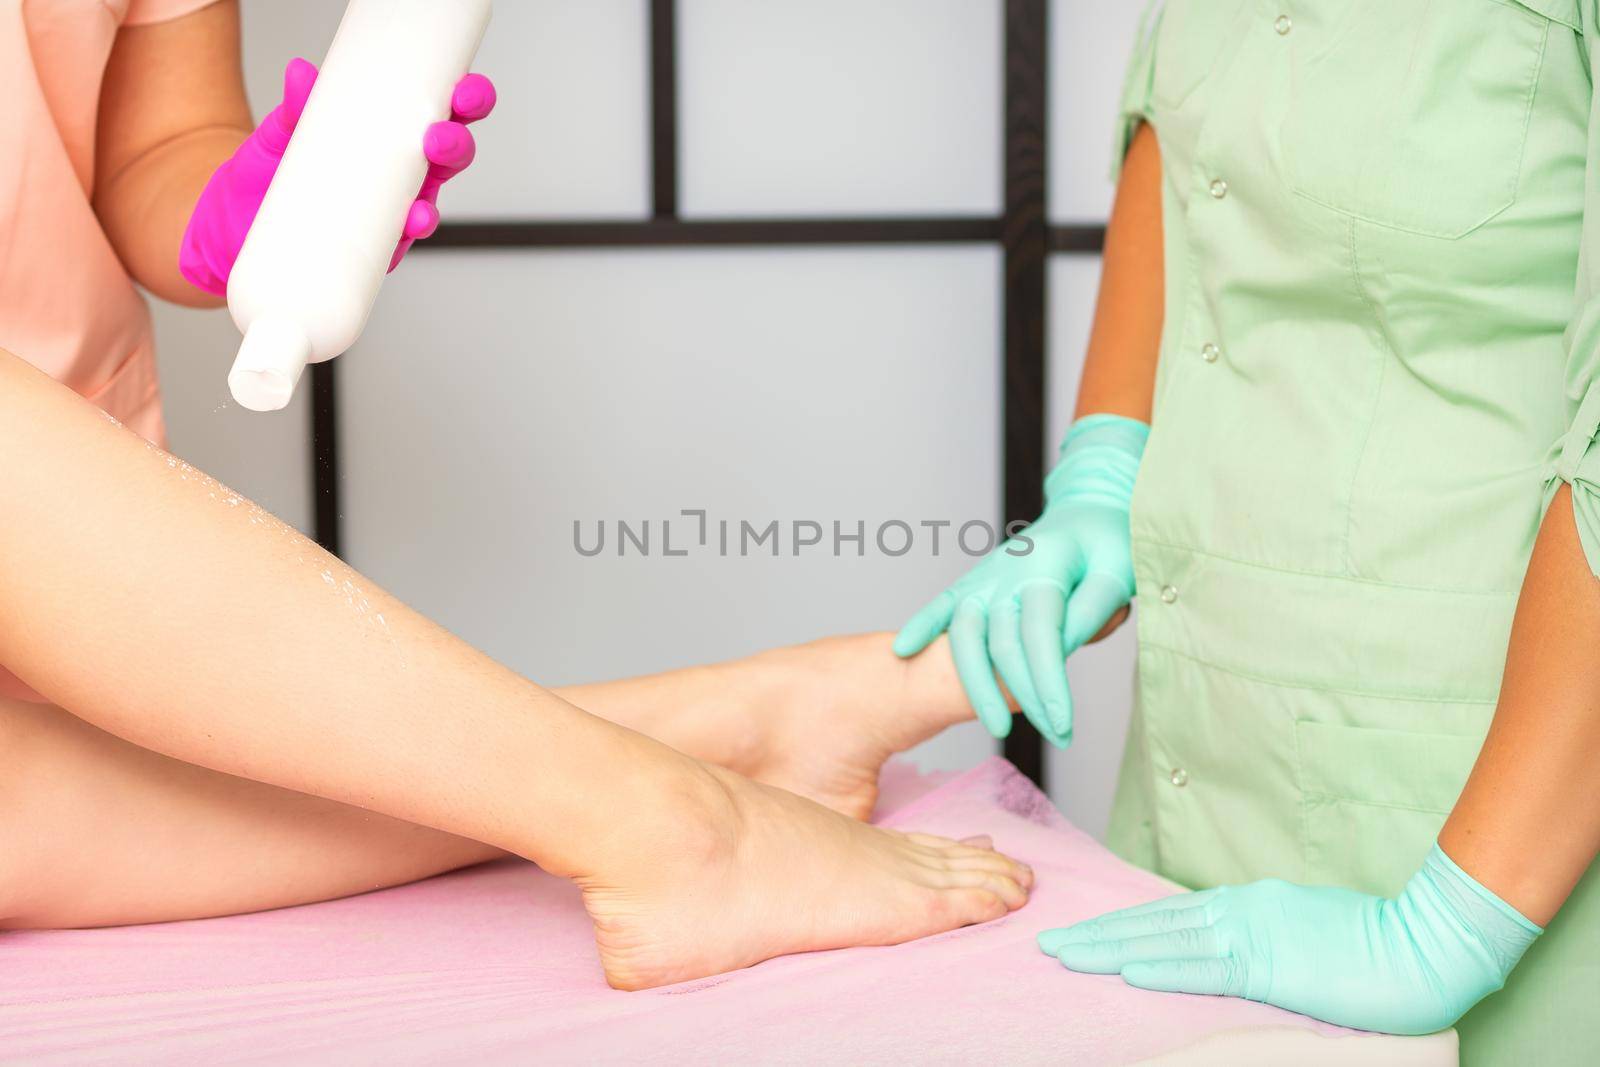 Procedure sugaring. A cosmetologist is sprinkling talcum powder on a young female leg before the depilation procedure. by okskukuruza